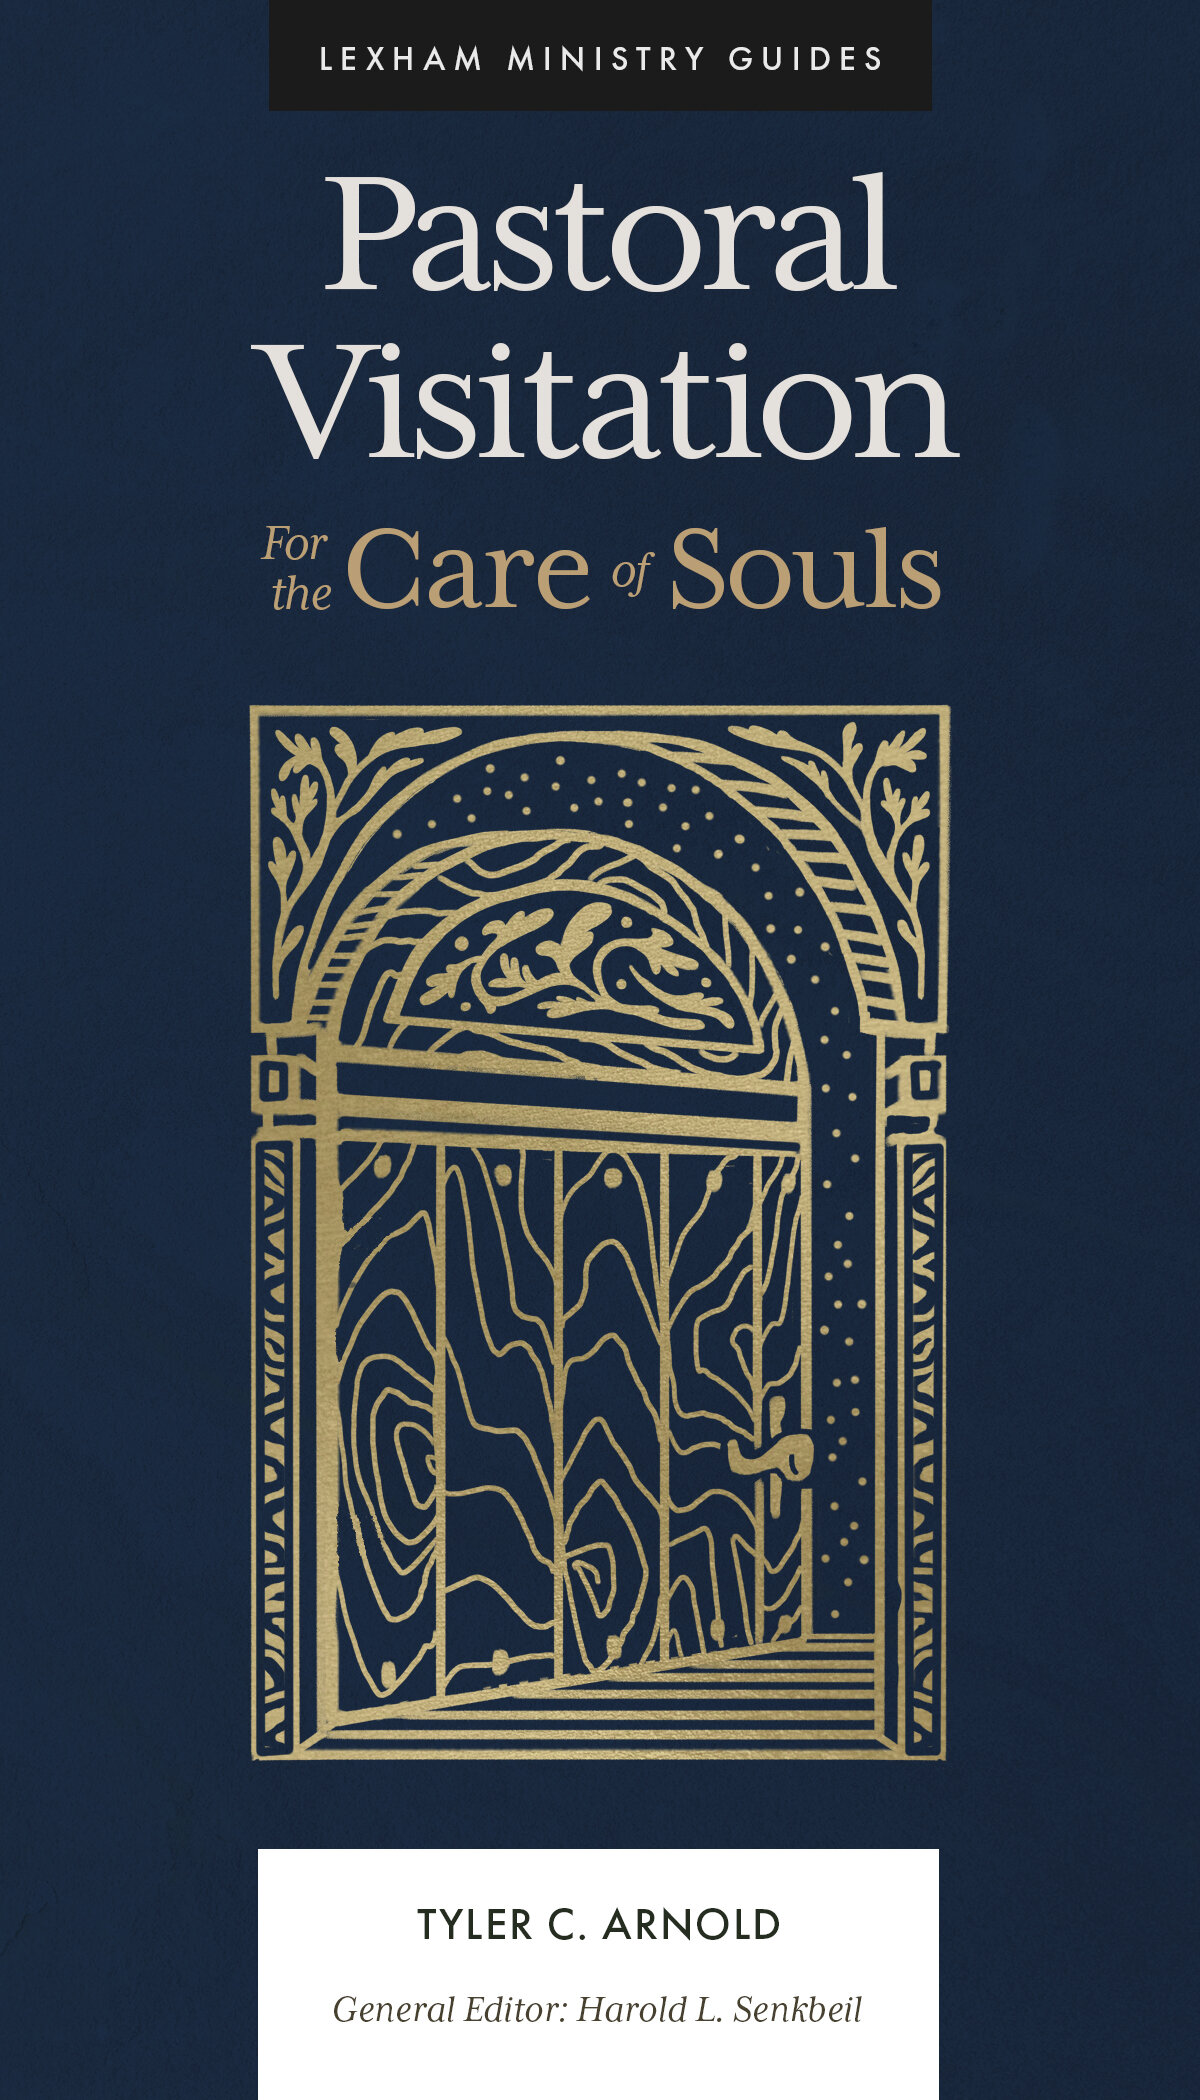 Pastoral Visitation: For the Care of Souls (Lexham Ministry Guides)